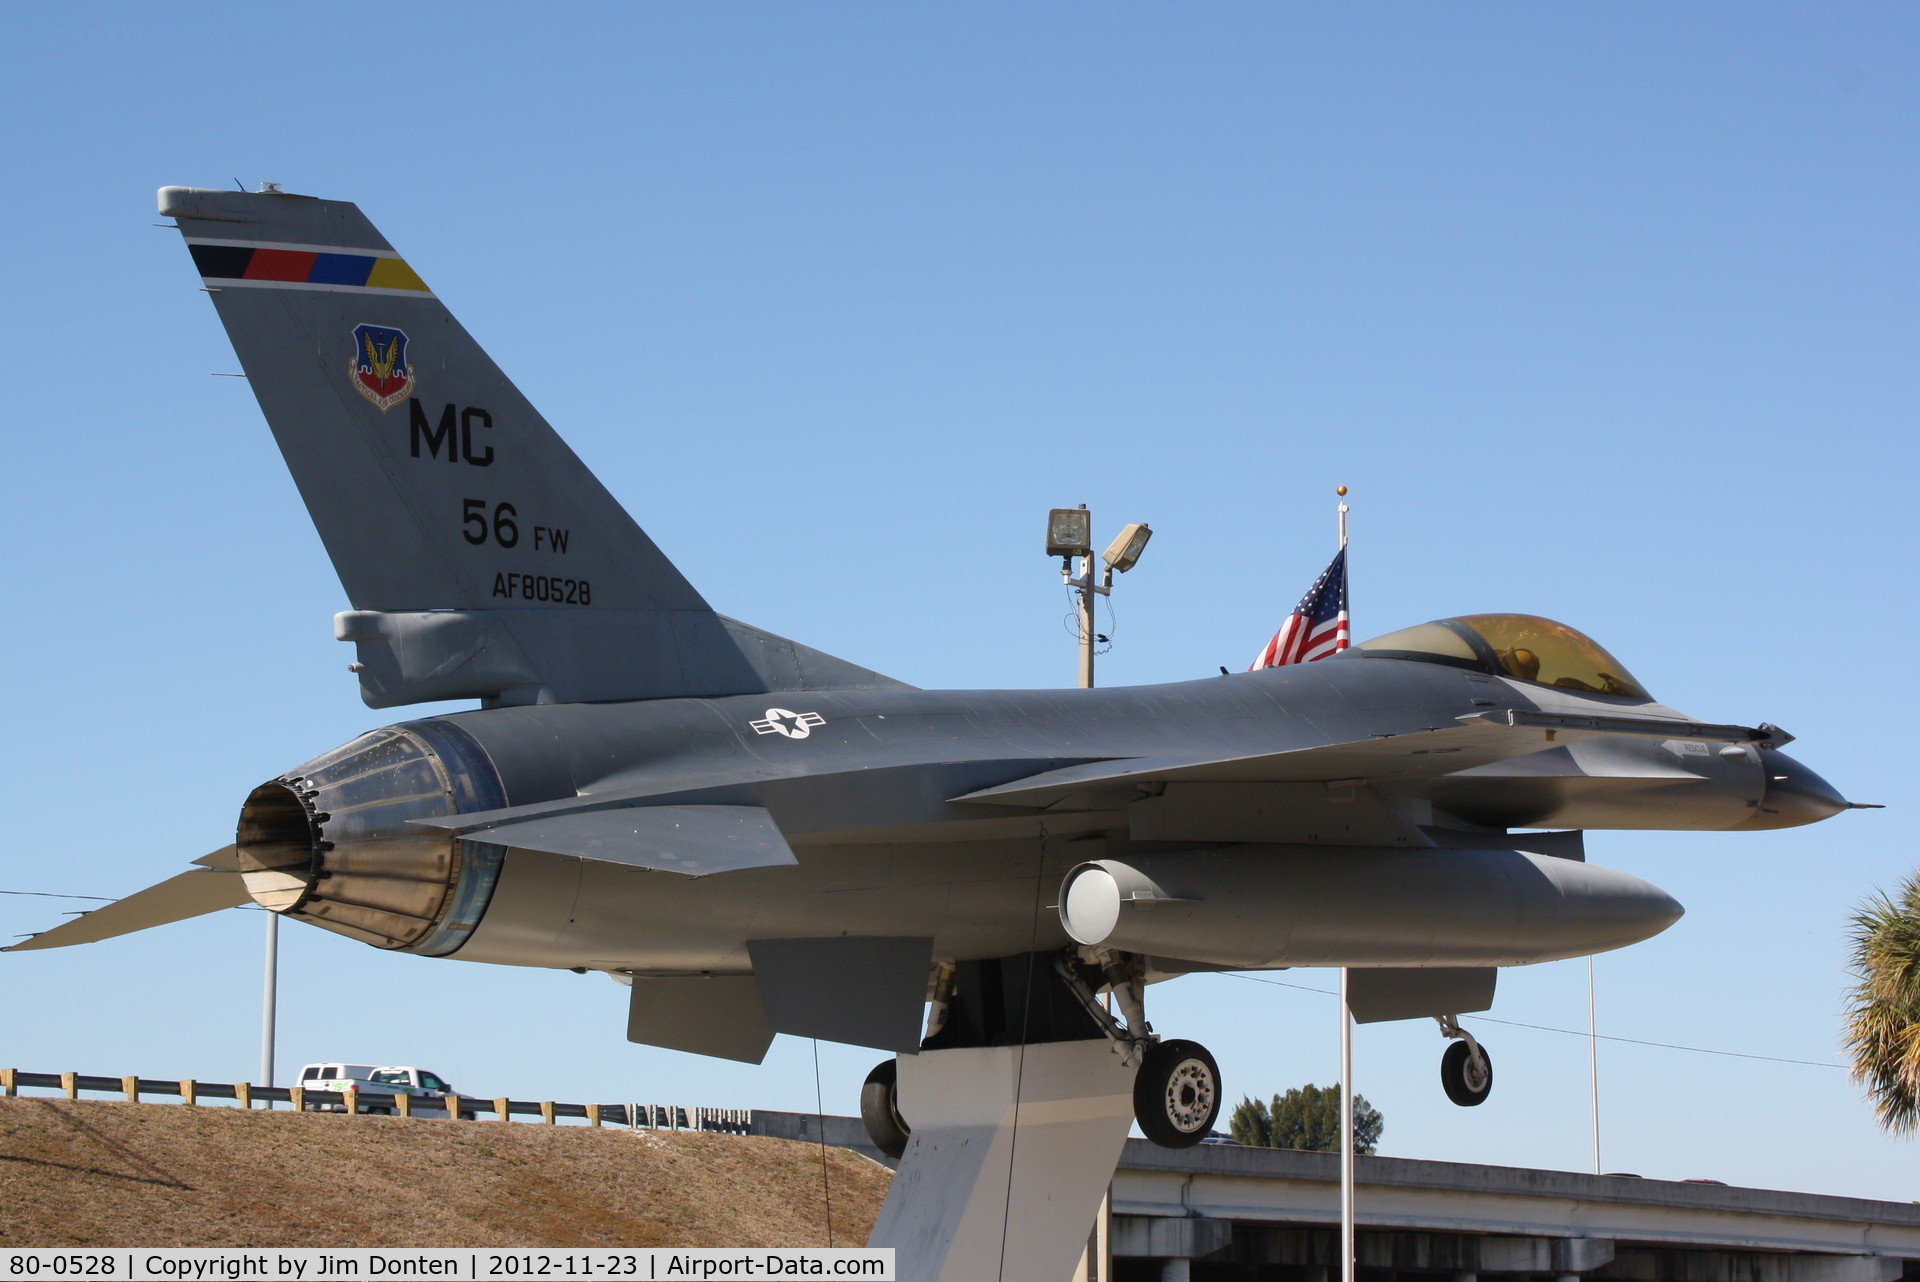 80-0528, General Dynamics F-16A Fighting Falcon C/N 61-249, An F-16 Fighting Falcon (80-0528) of the 56th Tactical Fighter Wing from MacDill Air Force Base sits on display at Freedom Lake Park